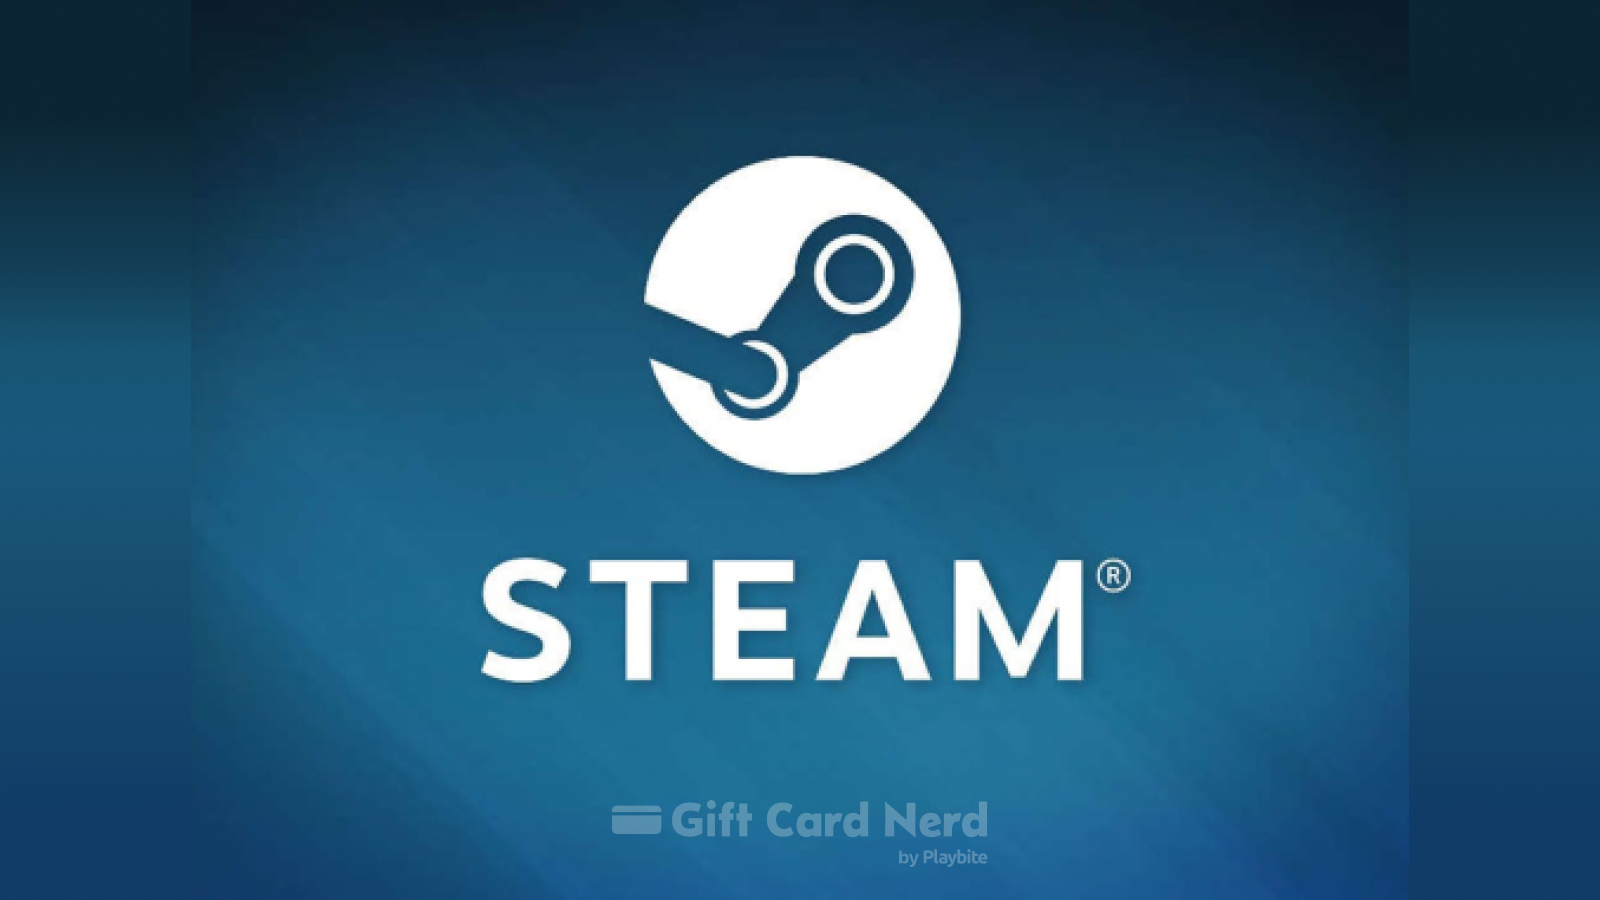 Does Walgreens Sell Steam Gift Cards?